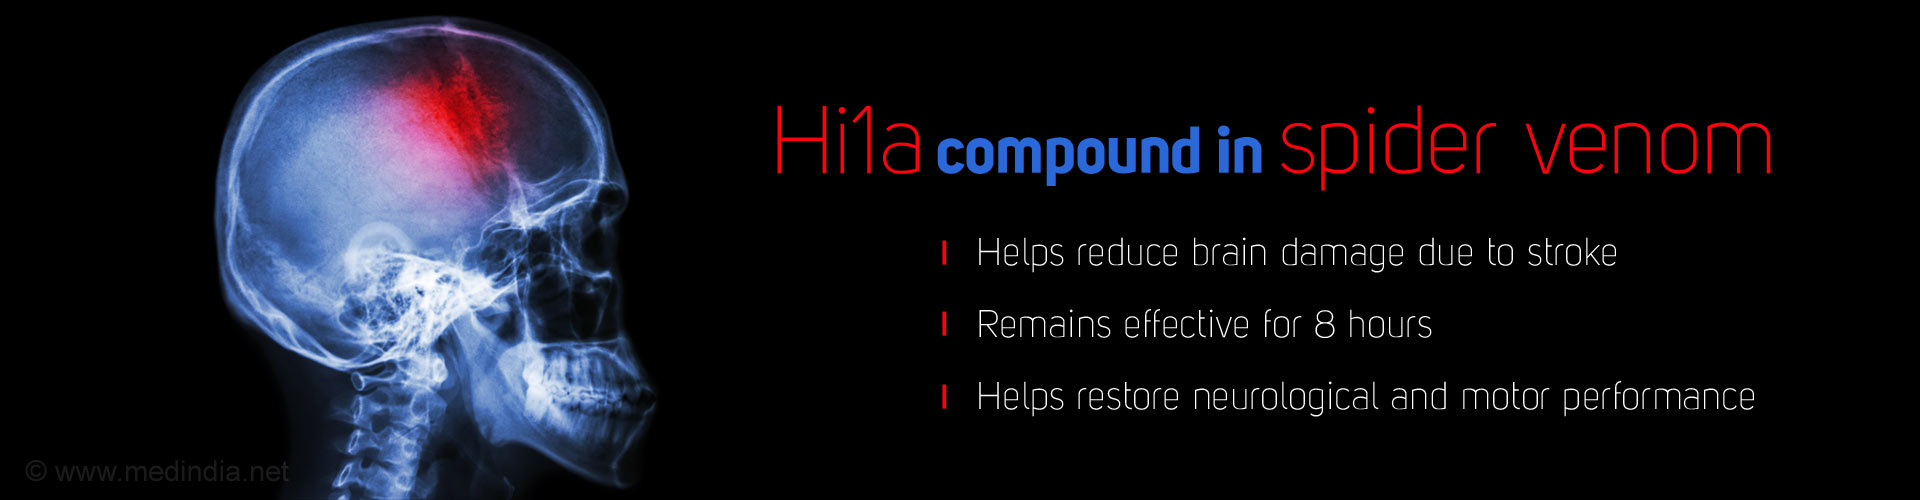 Hi1a compound in spider venom
- Helps reduce brain damage due to stroke
- Remains effective for 8 hours
- Helps restore neurological and motor performance